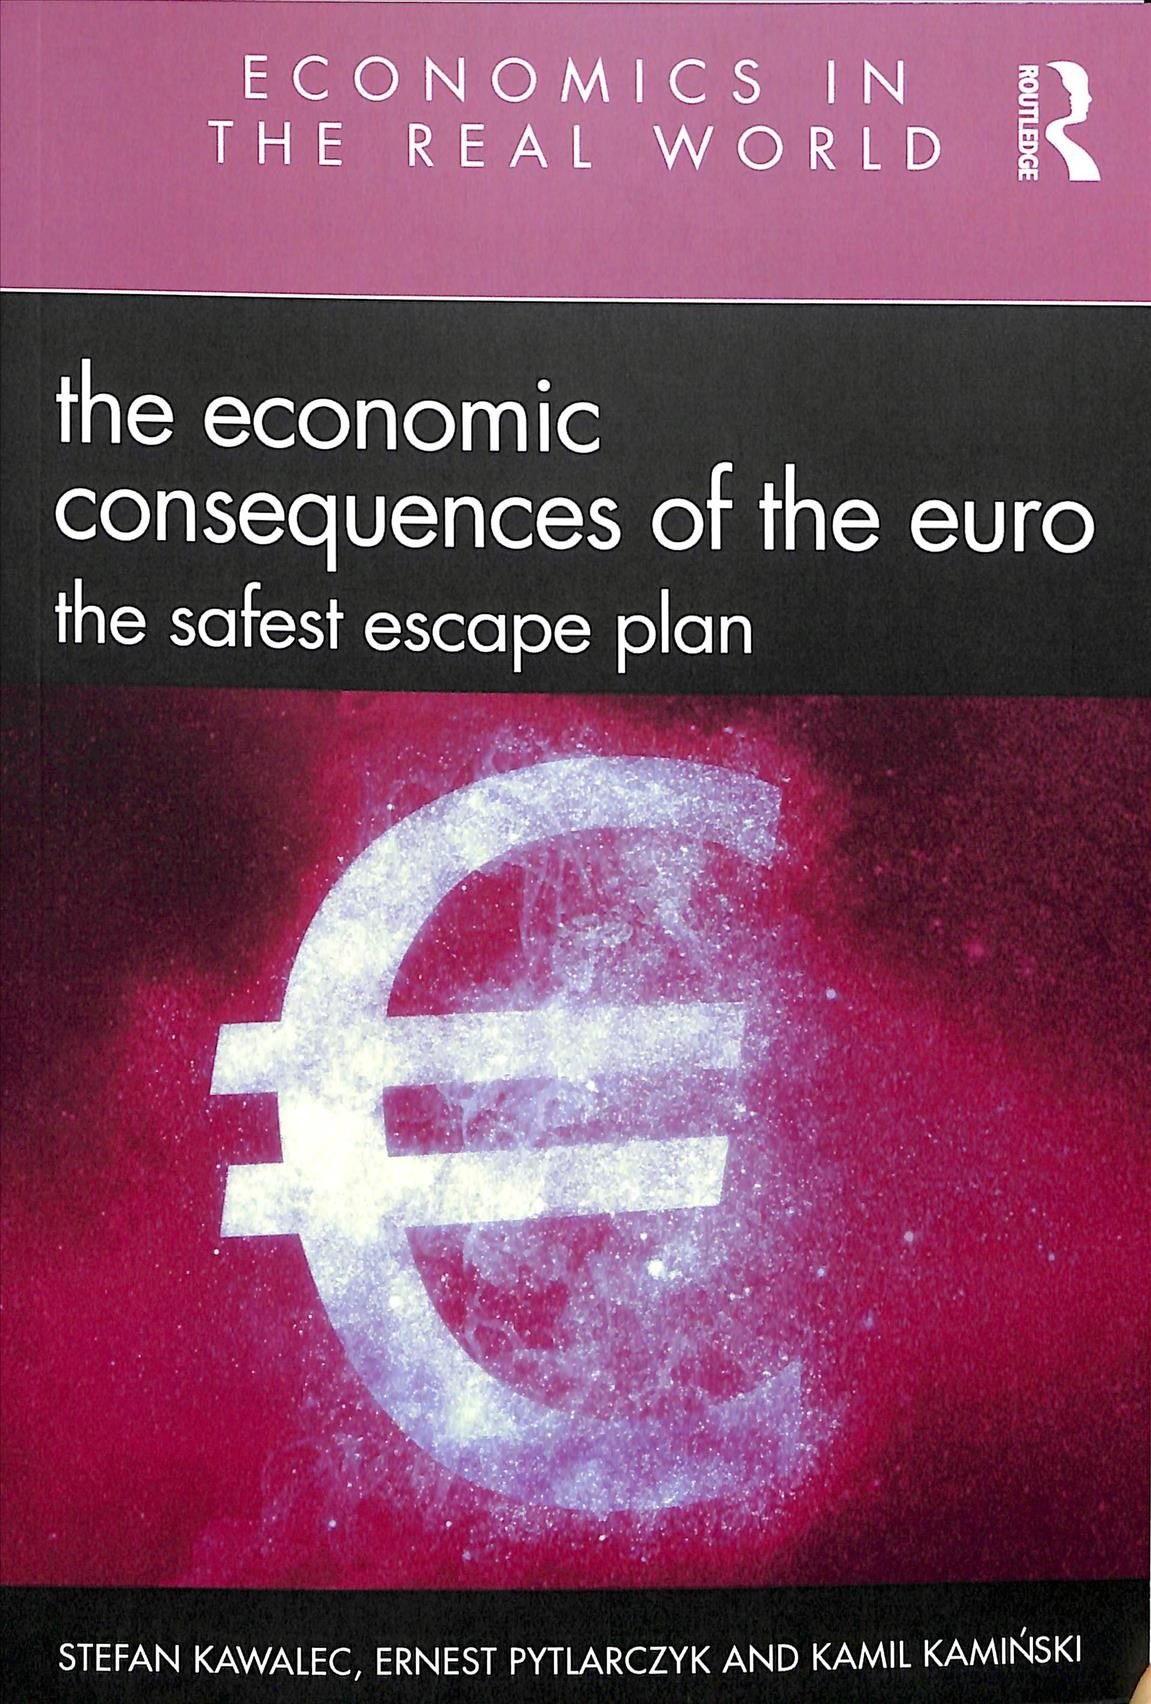 The Economic Consequences of the Euro